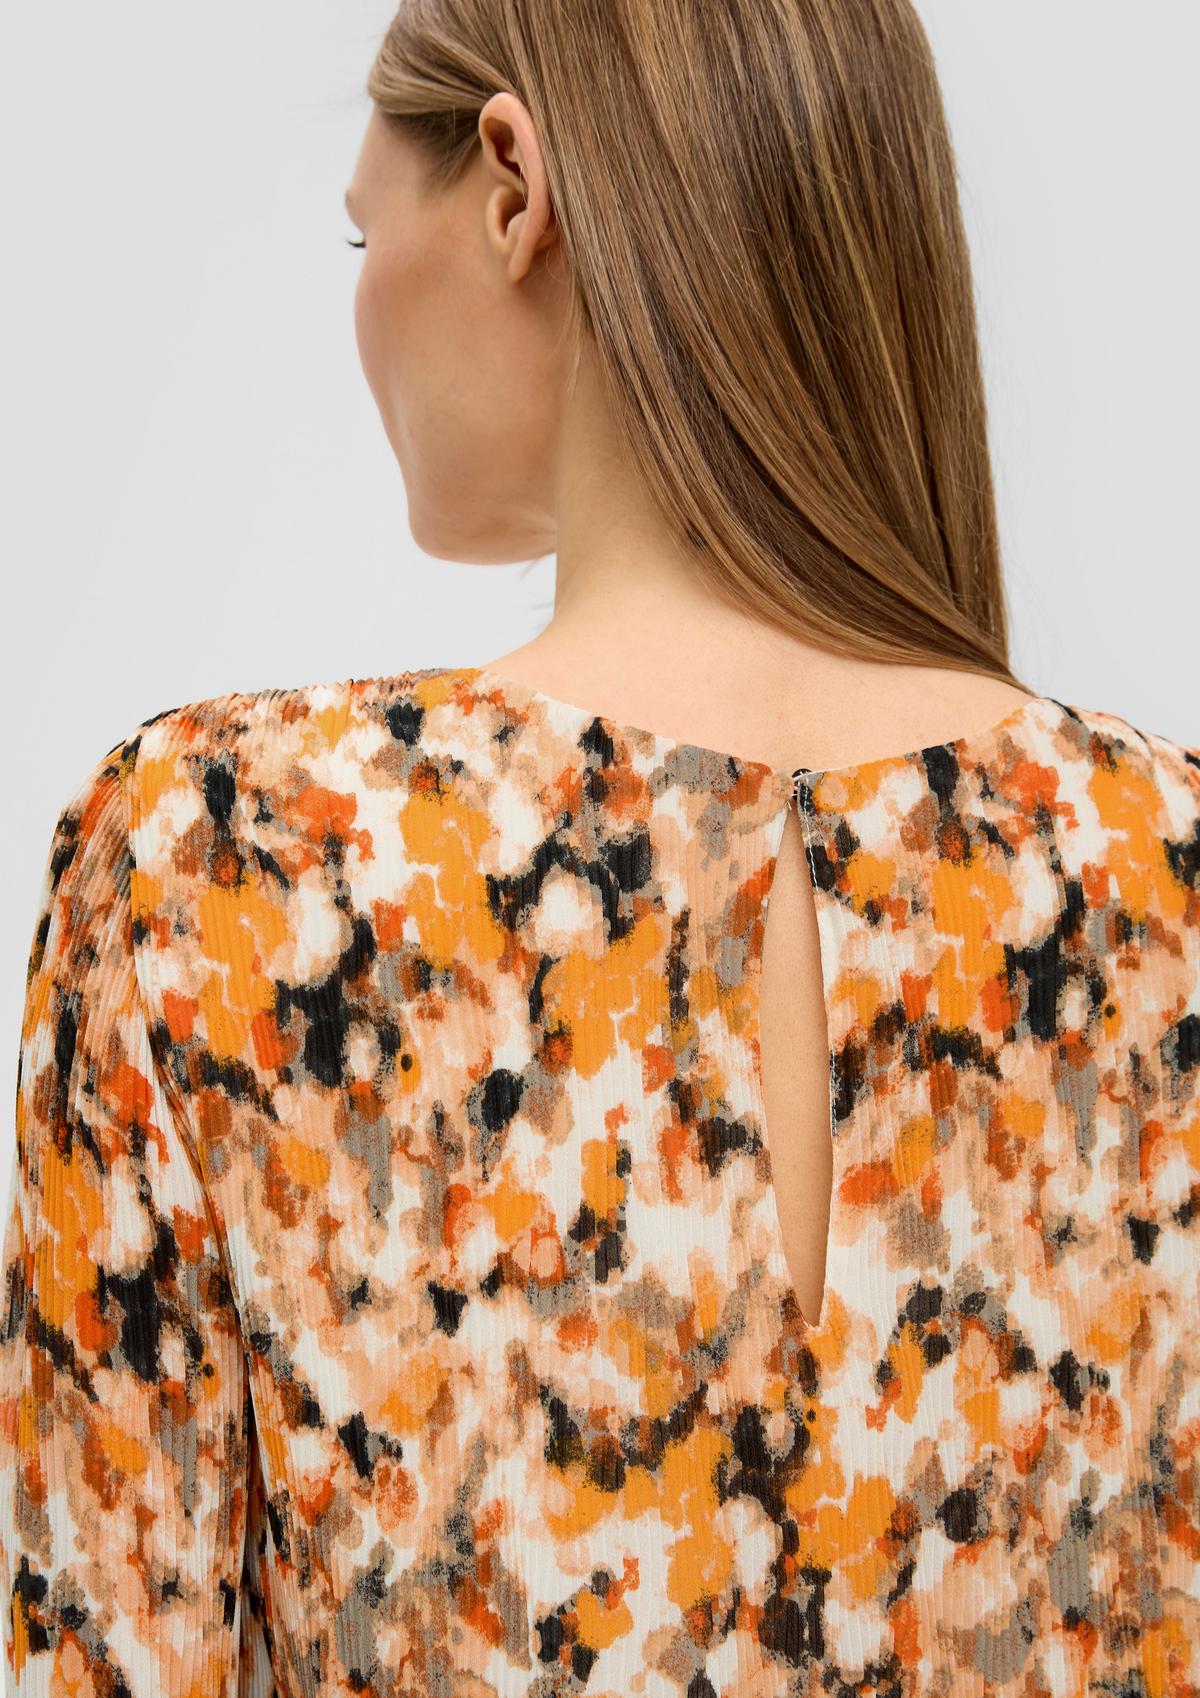 s.Oliver Chiffon blouse with woven texture